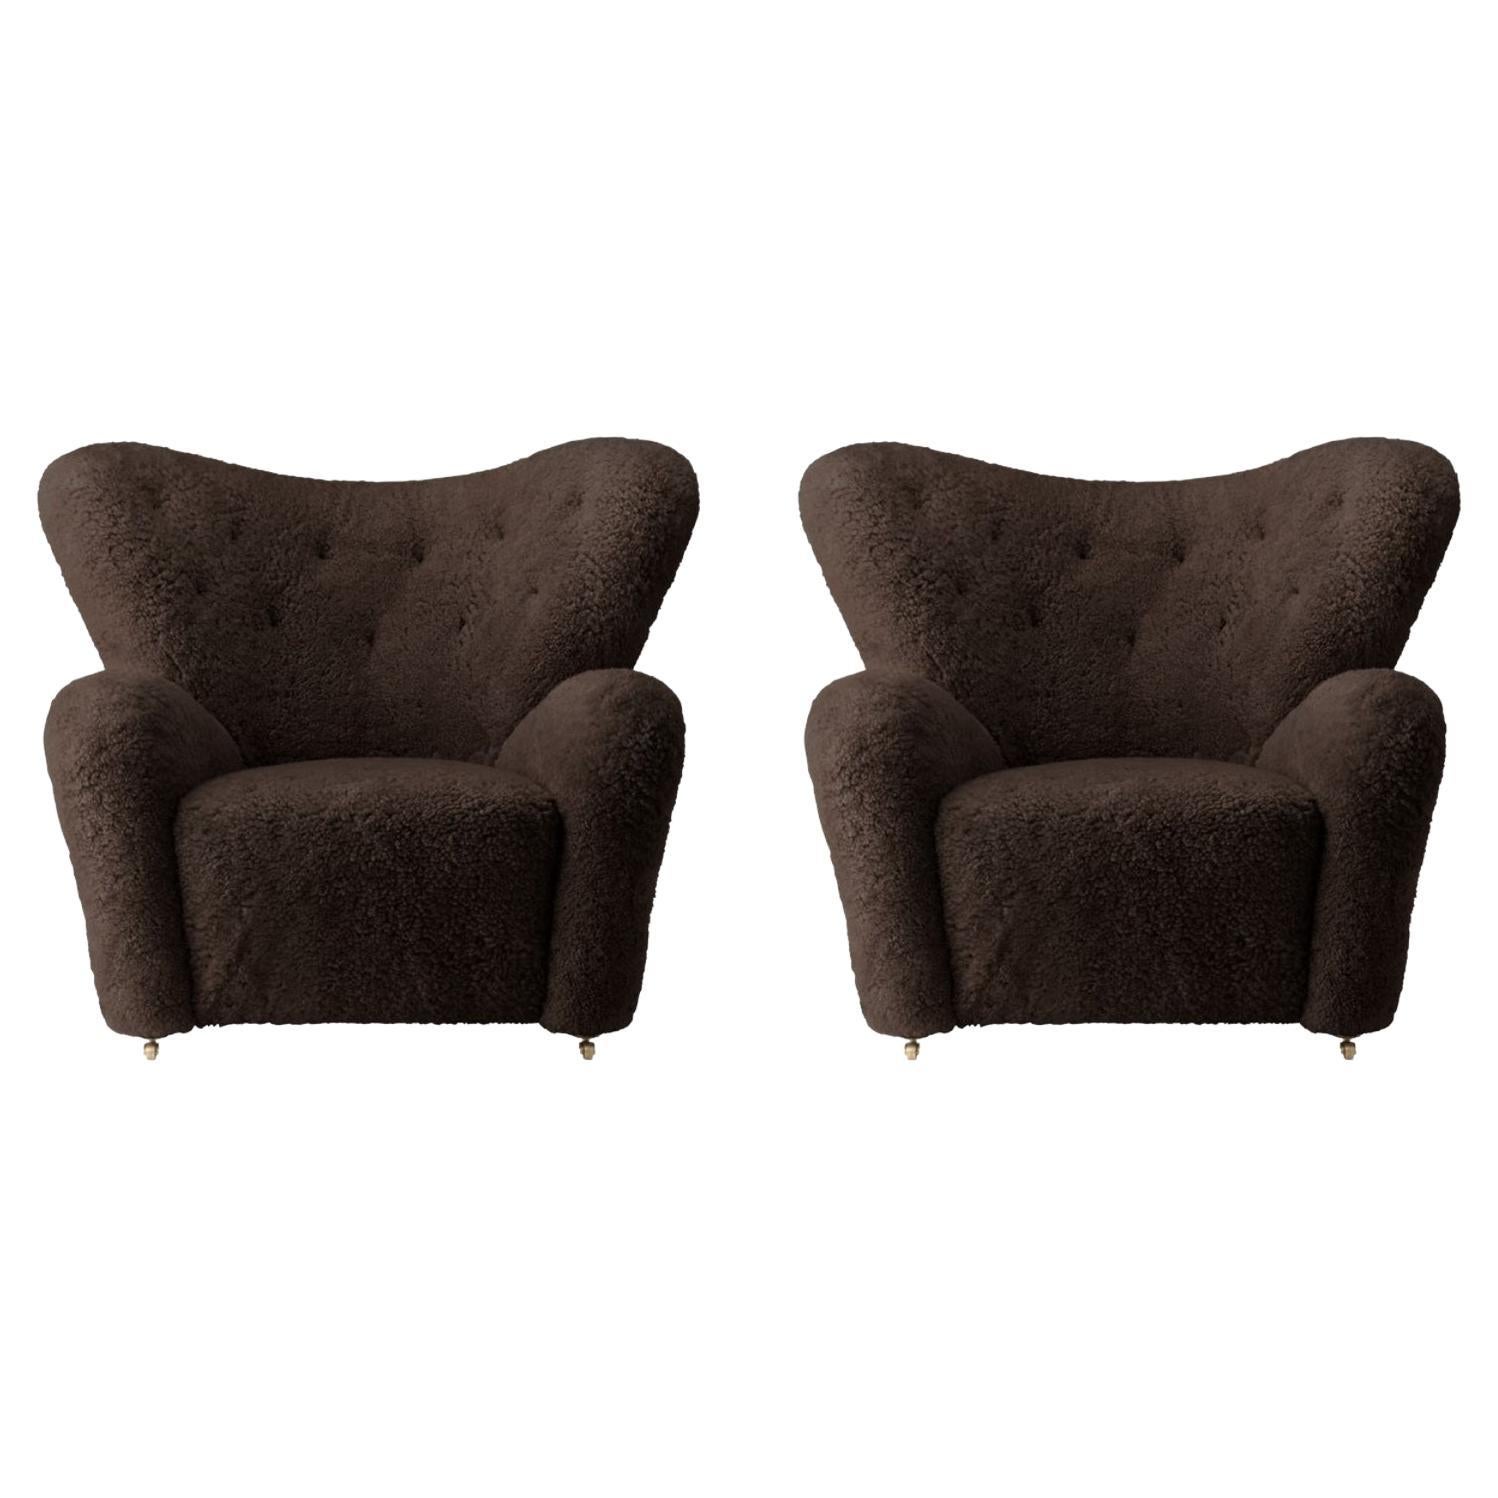 Set of 2 Espresso Sheepskin the Tired Man Lounge Chair by Lassen For Sale